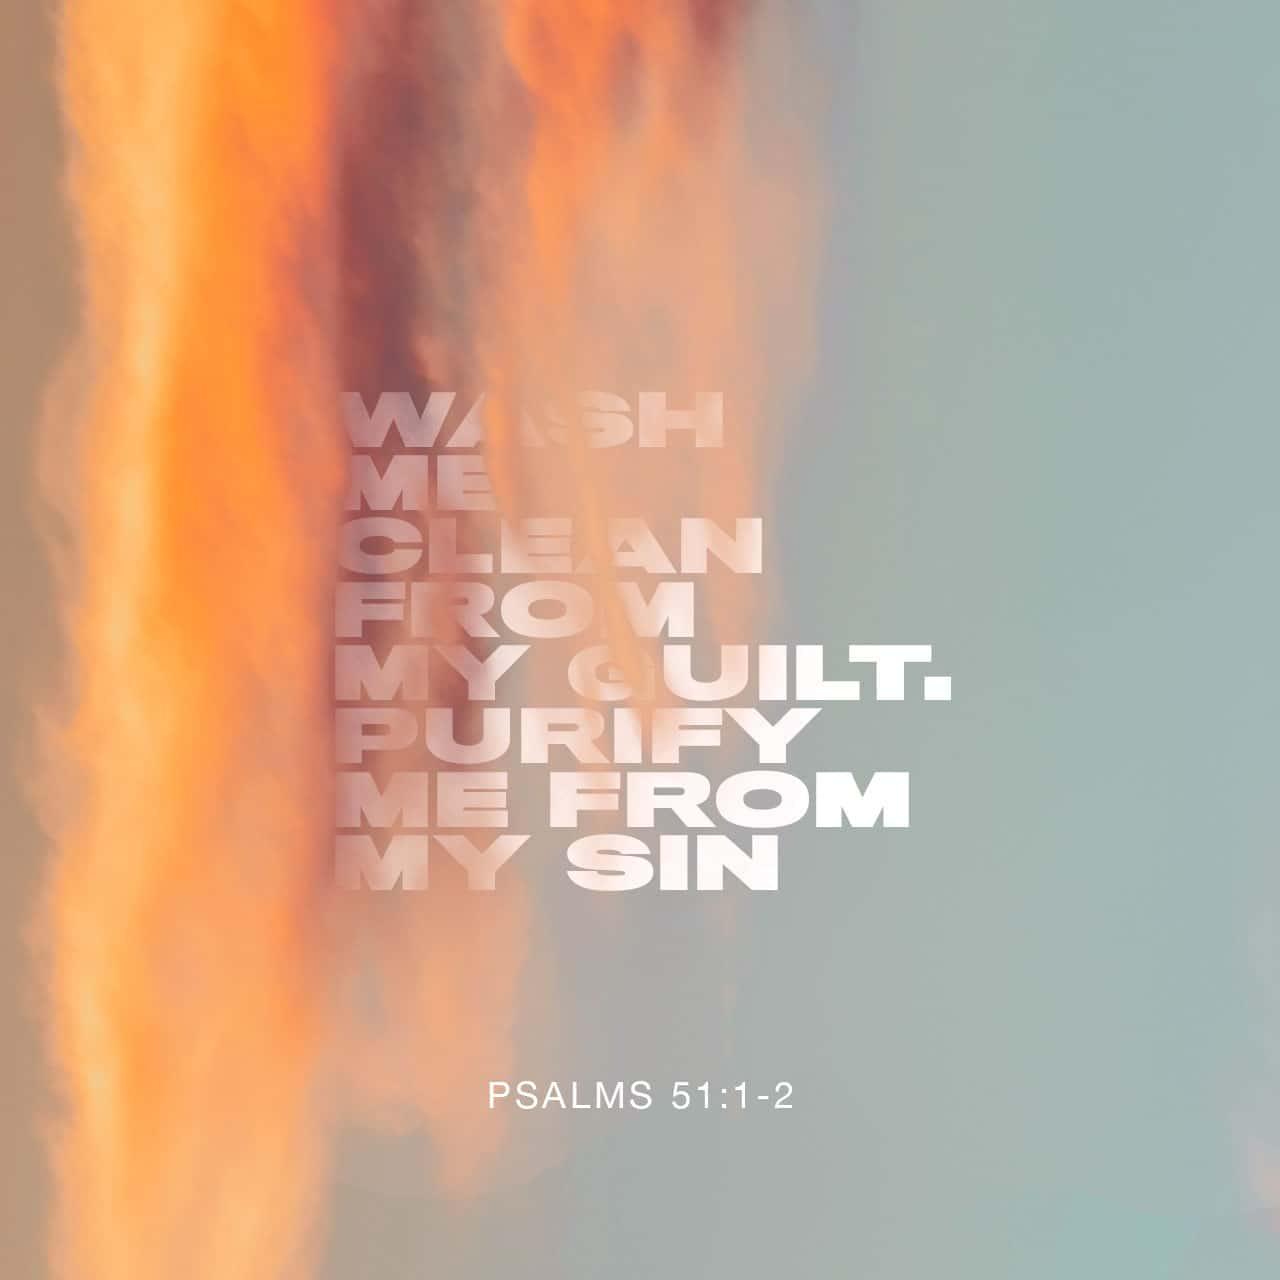 Bible Verse of the Day - day 89 - image 62588 (Psalms 51:1-19)